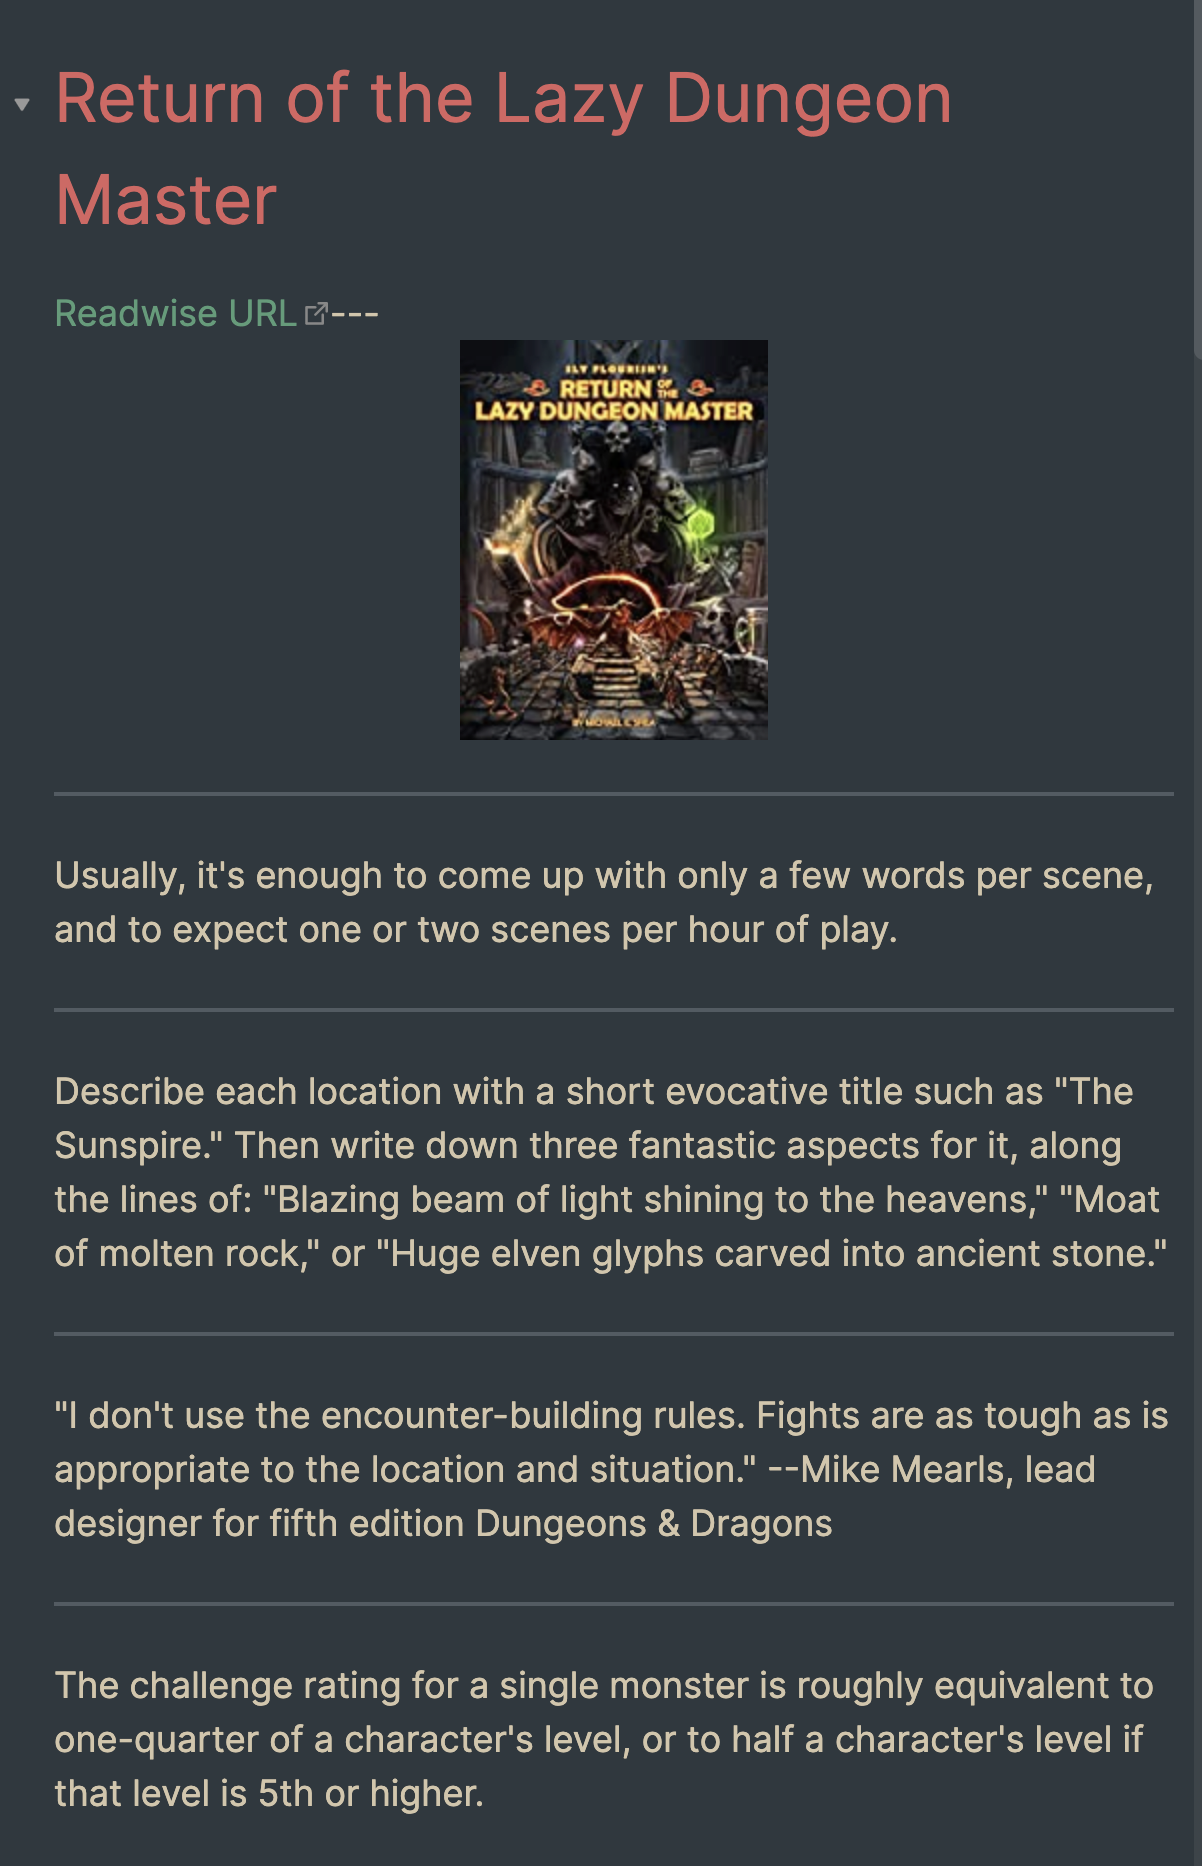 My notes on Return of the Lazy Dungeon Master